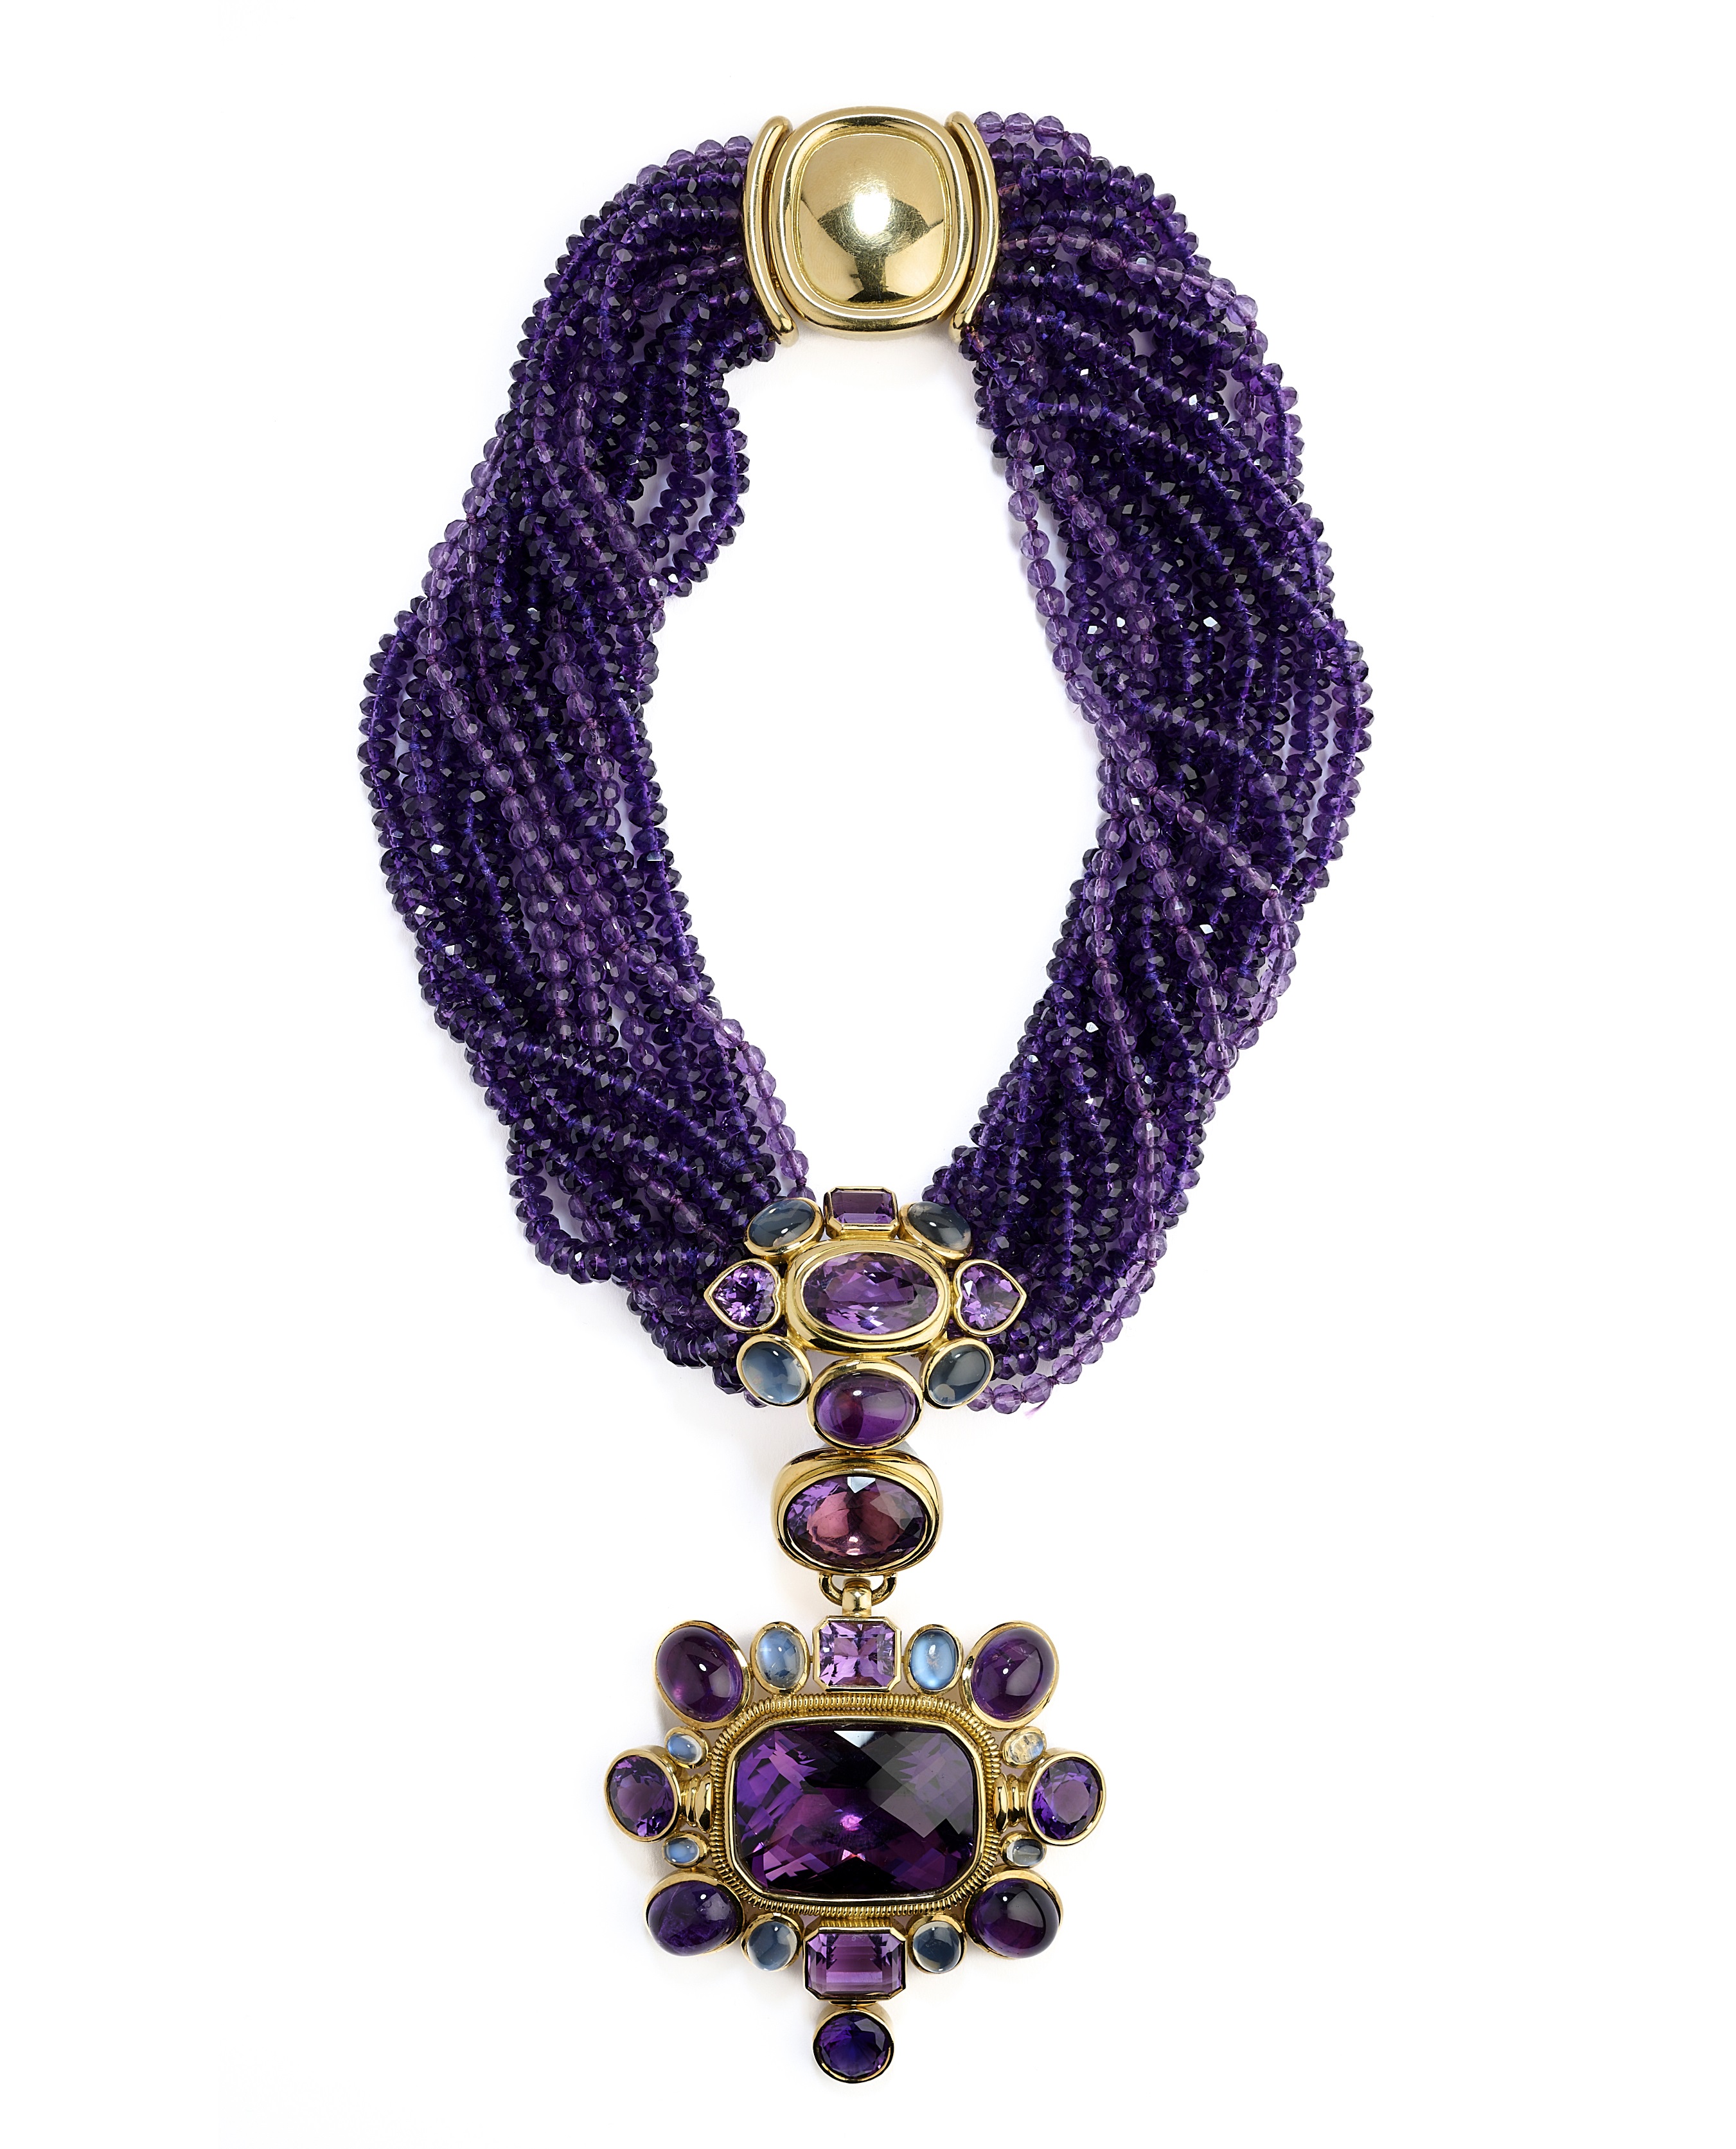 CHARLES GREIG: AMETHYST AND MOONSTONE NECKLACE